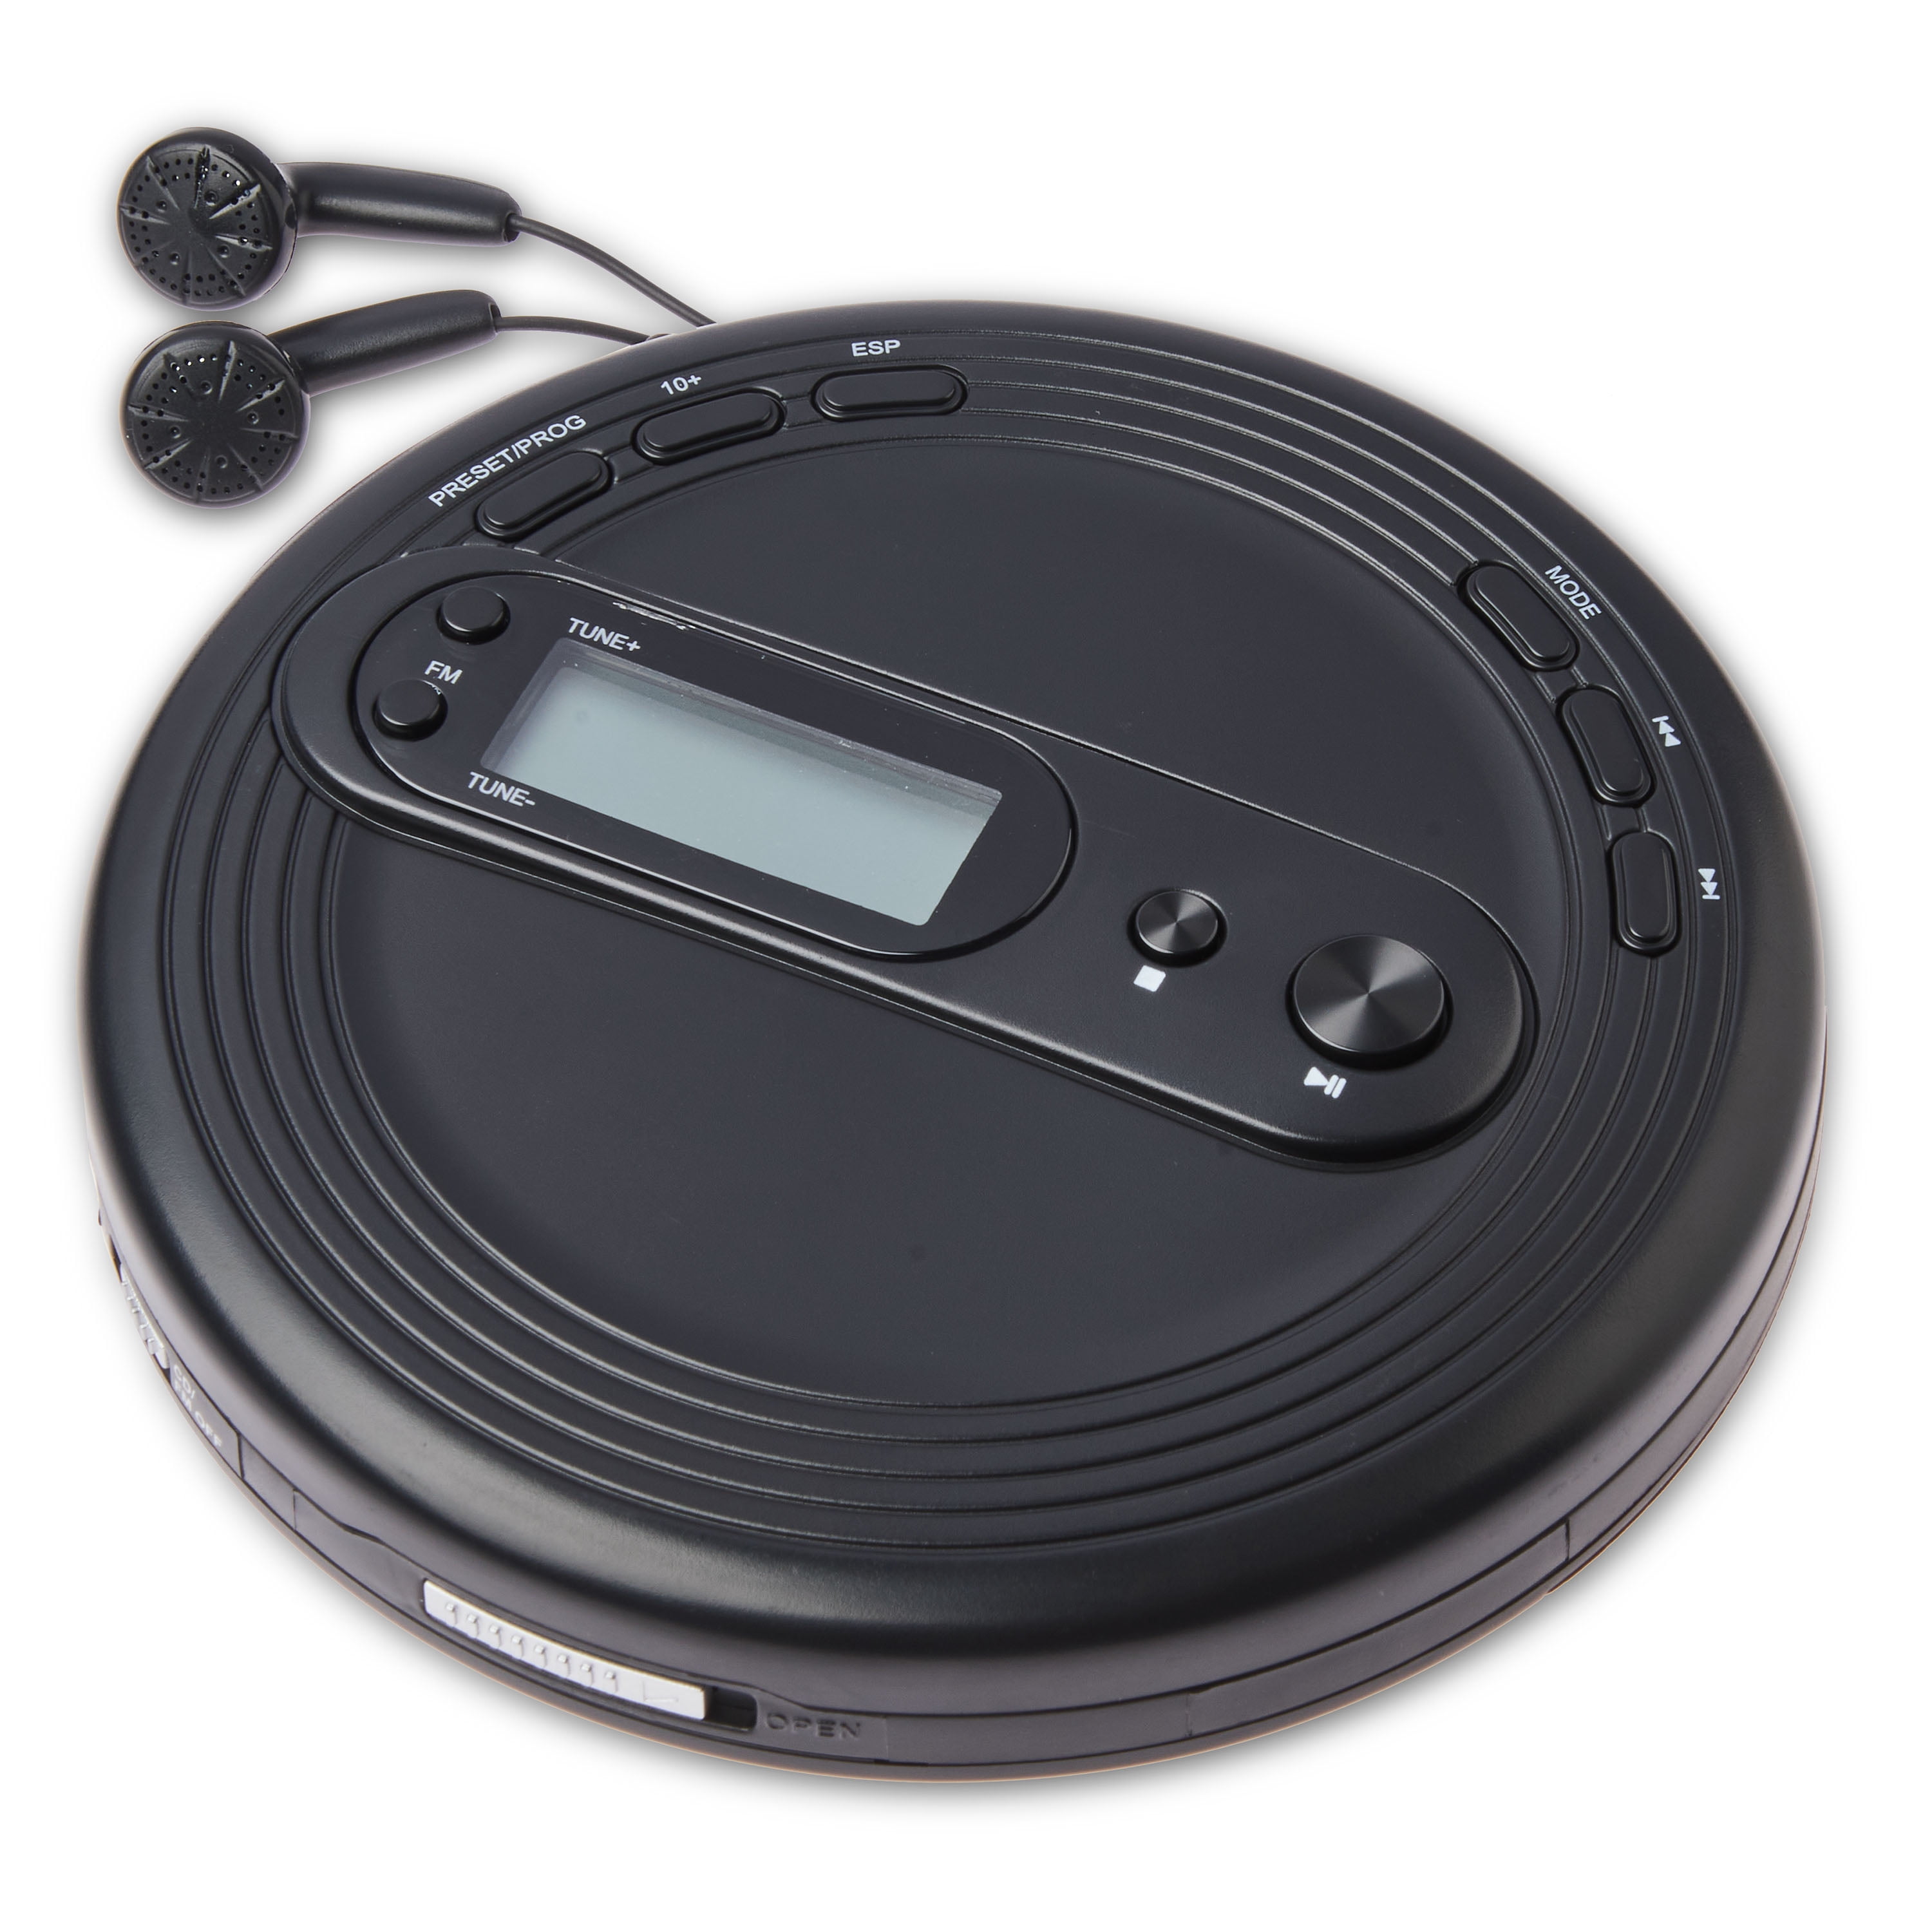 ONN personal/portable CD player with FM radio 